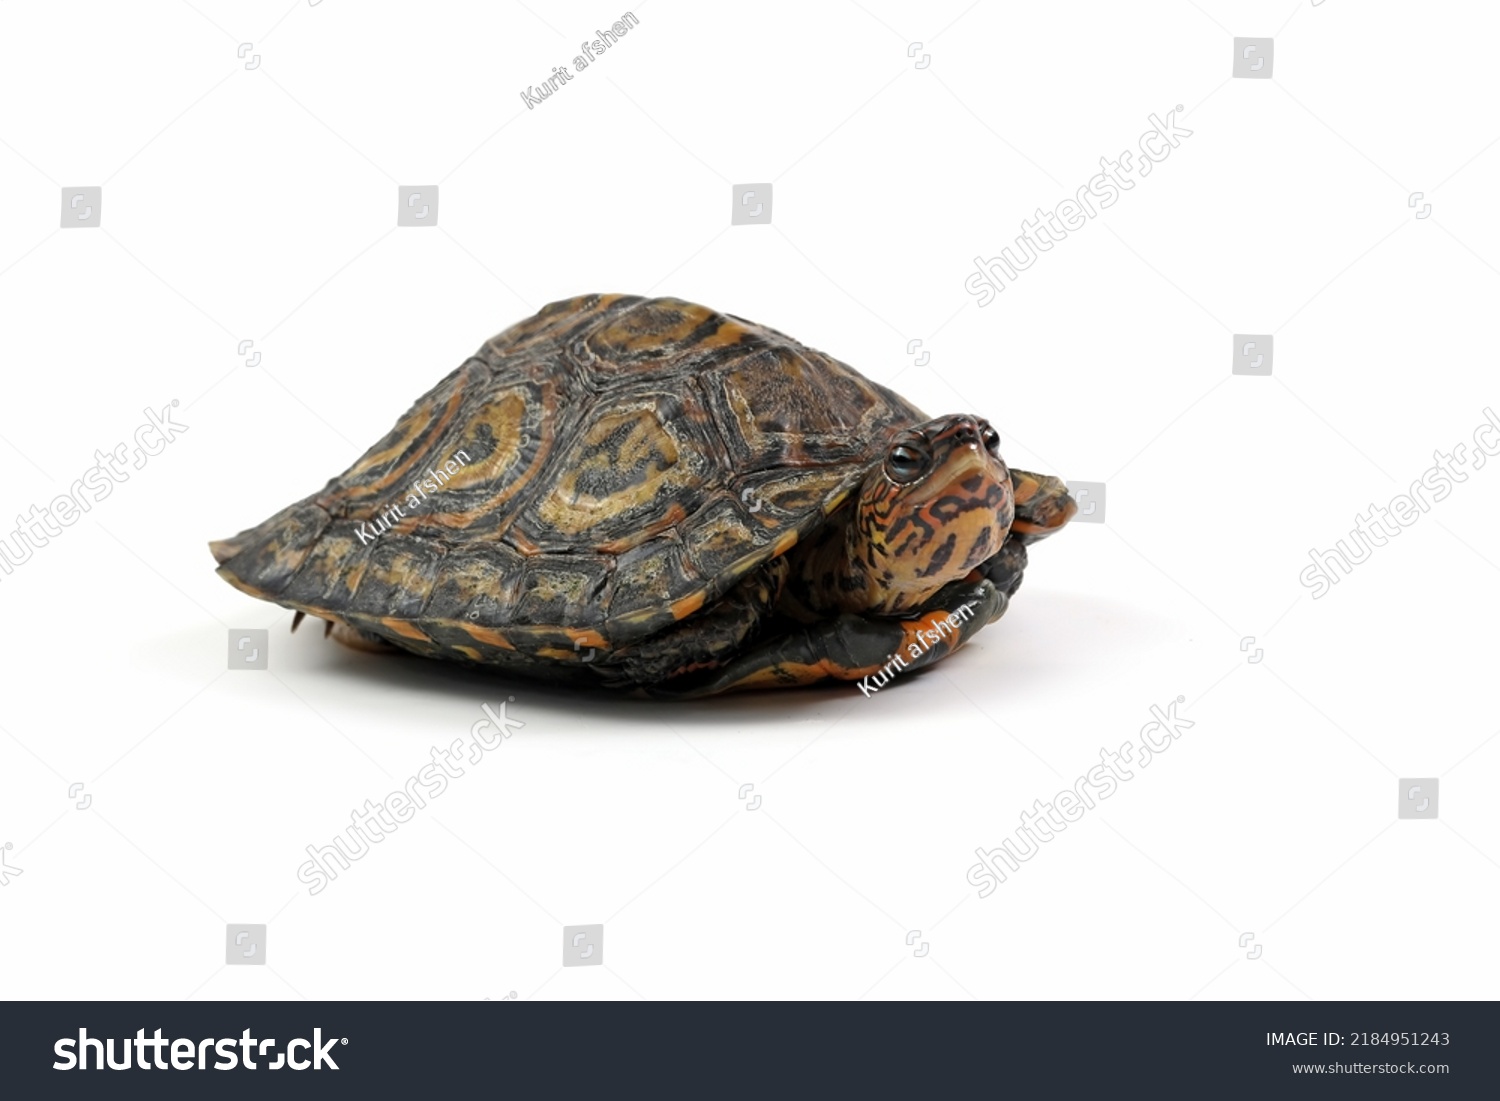 Ornate Wood Turtle closeup from side view, Ornate Wood Turtle "Glyptemys insculpta" closeup on isolated background #2184951243